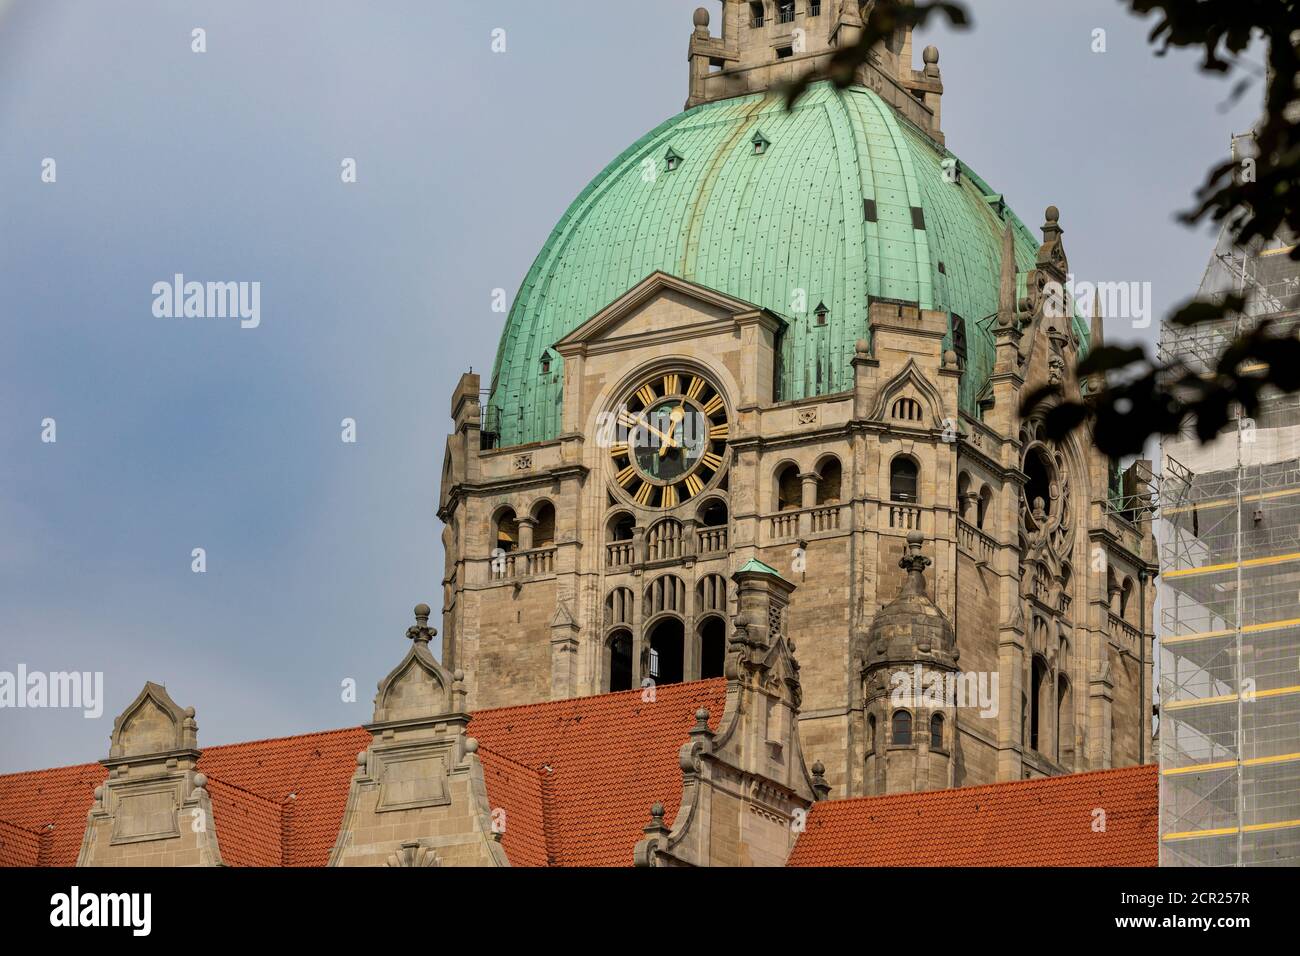 Architectural dome of historical building in Hannover, Germany Stock Photo